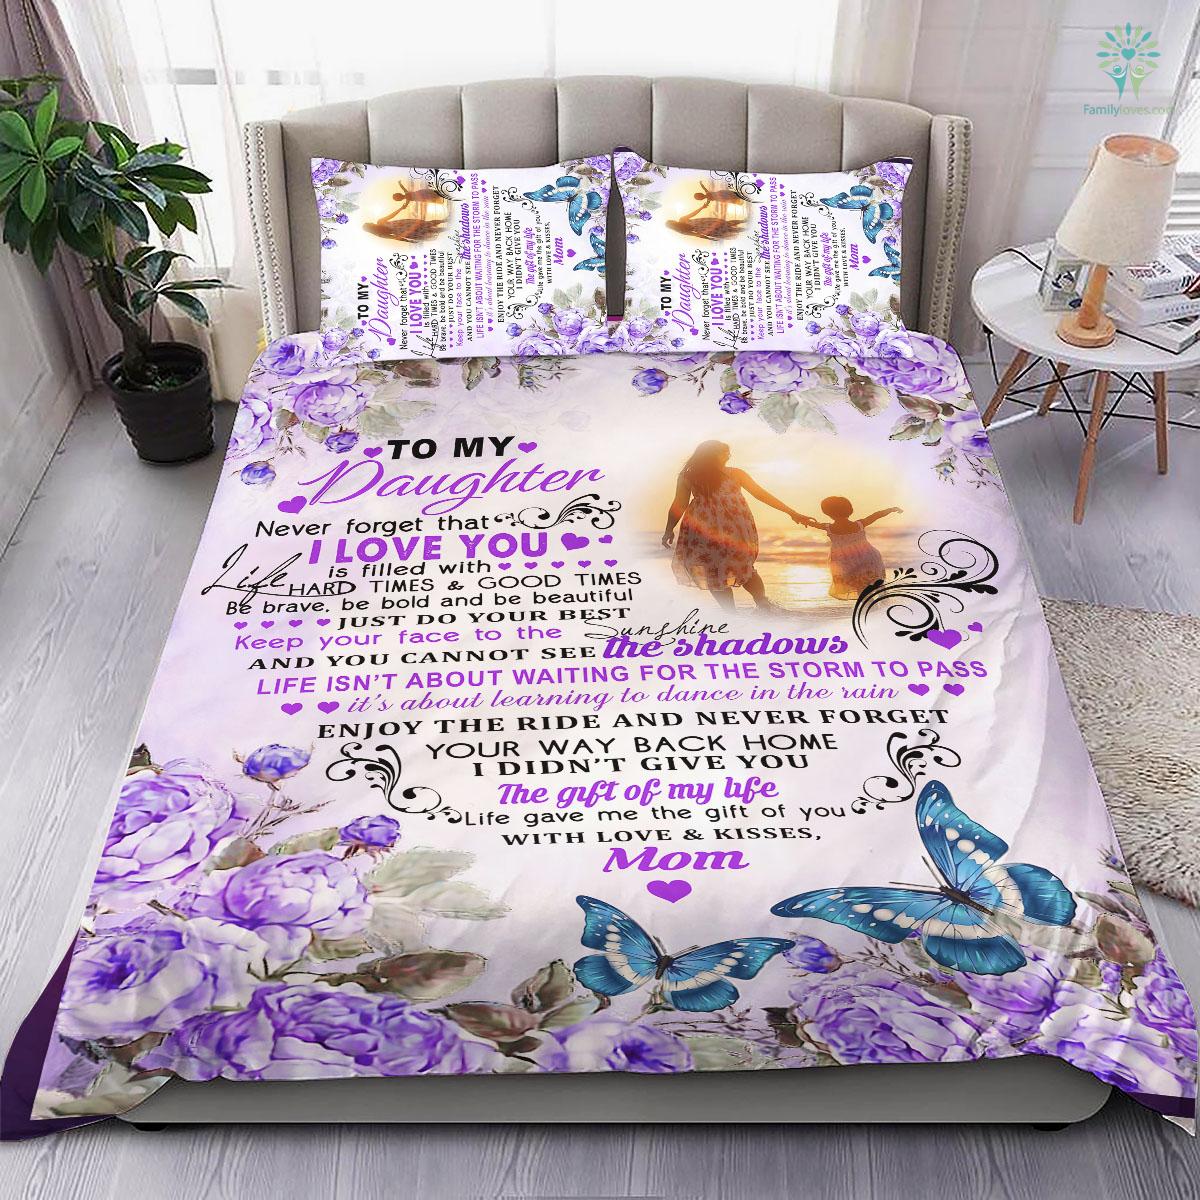 Butterfly Purple Mom Life Gave Me The Gift Of You With Love And Kisses To My Daughter Bedding Set - Family Loves US Military Veterans Shirts Gifts Ideas